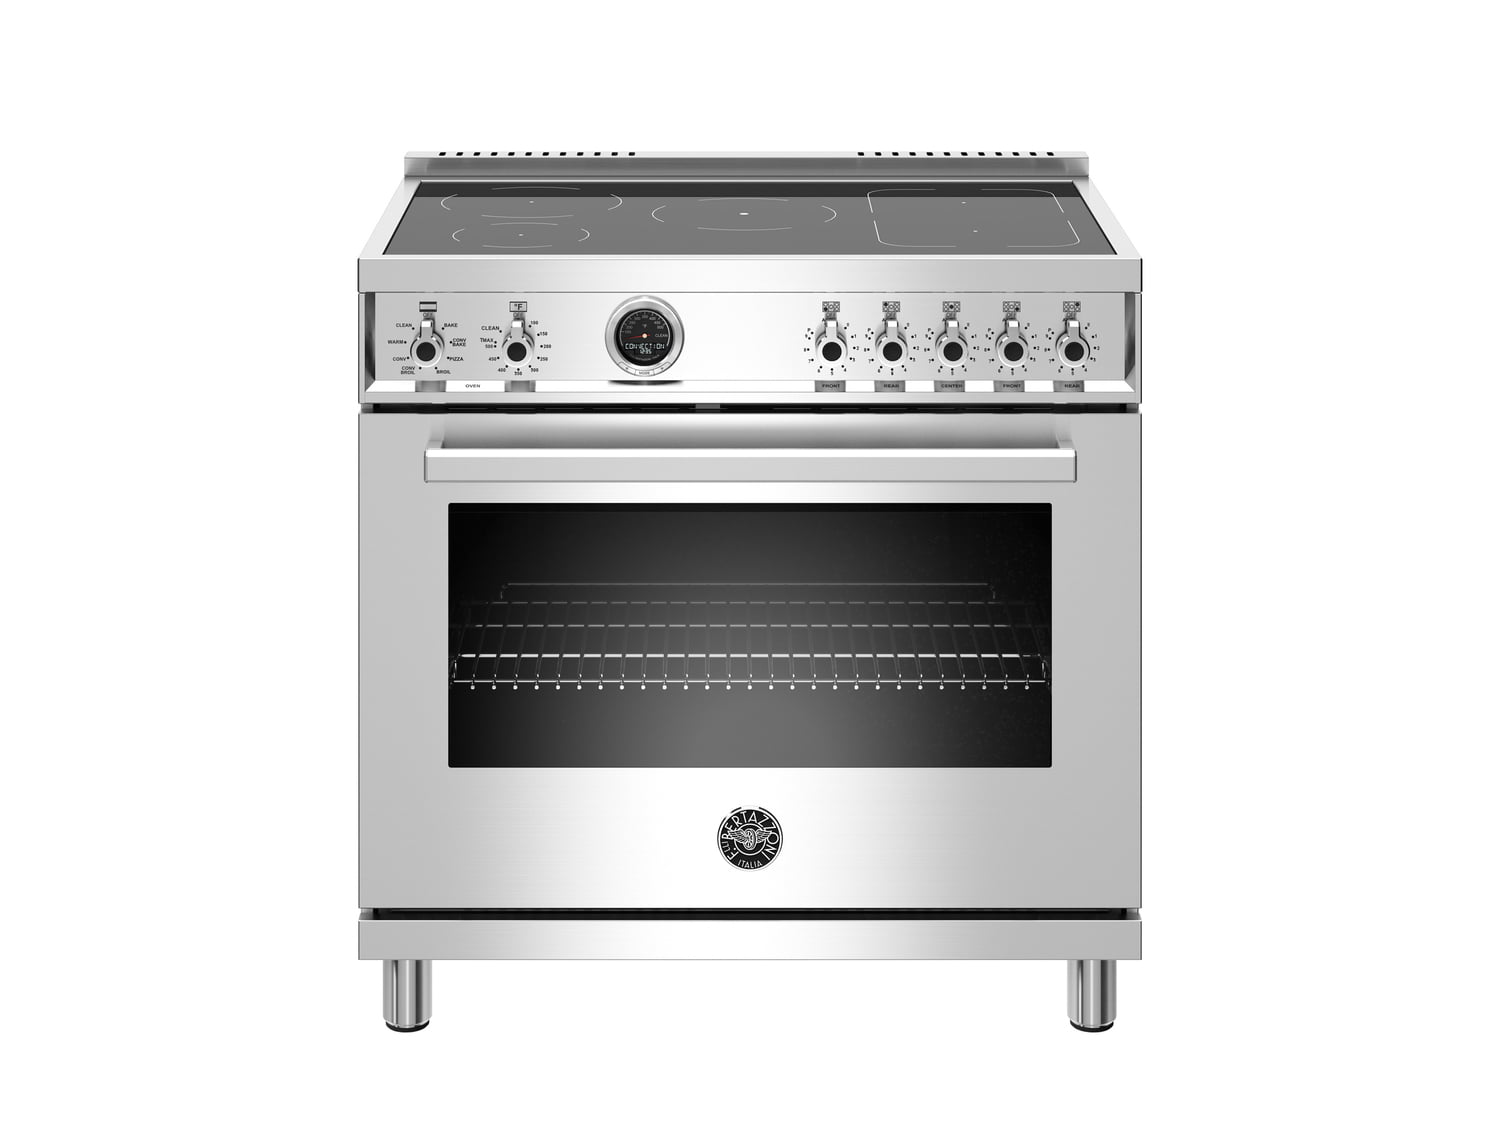 Bertazzoni PROF365INSXT 36 Inch Induction Range, 5 Heating Zones, Electric Self-Clean Oven Stainless Steel